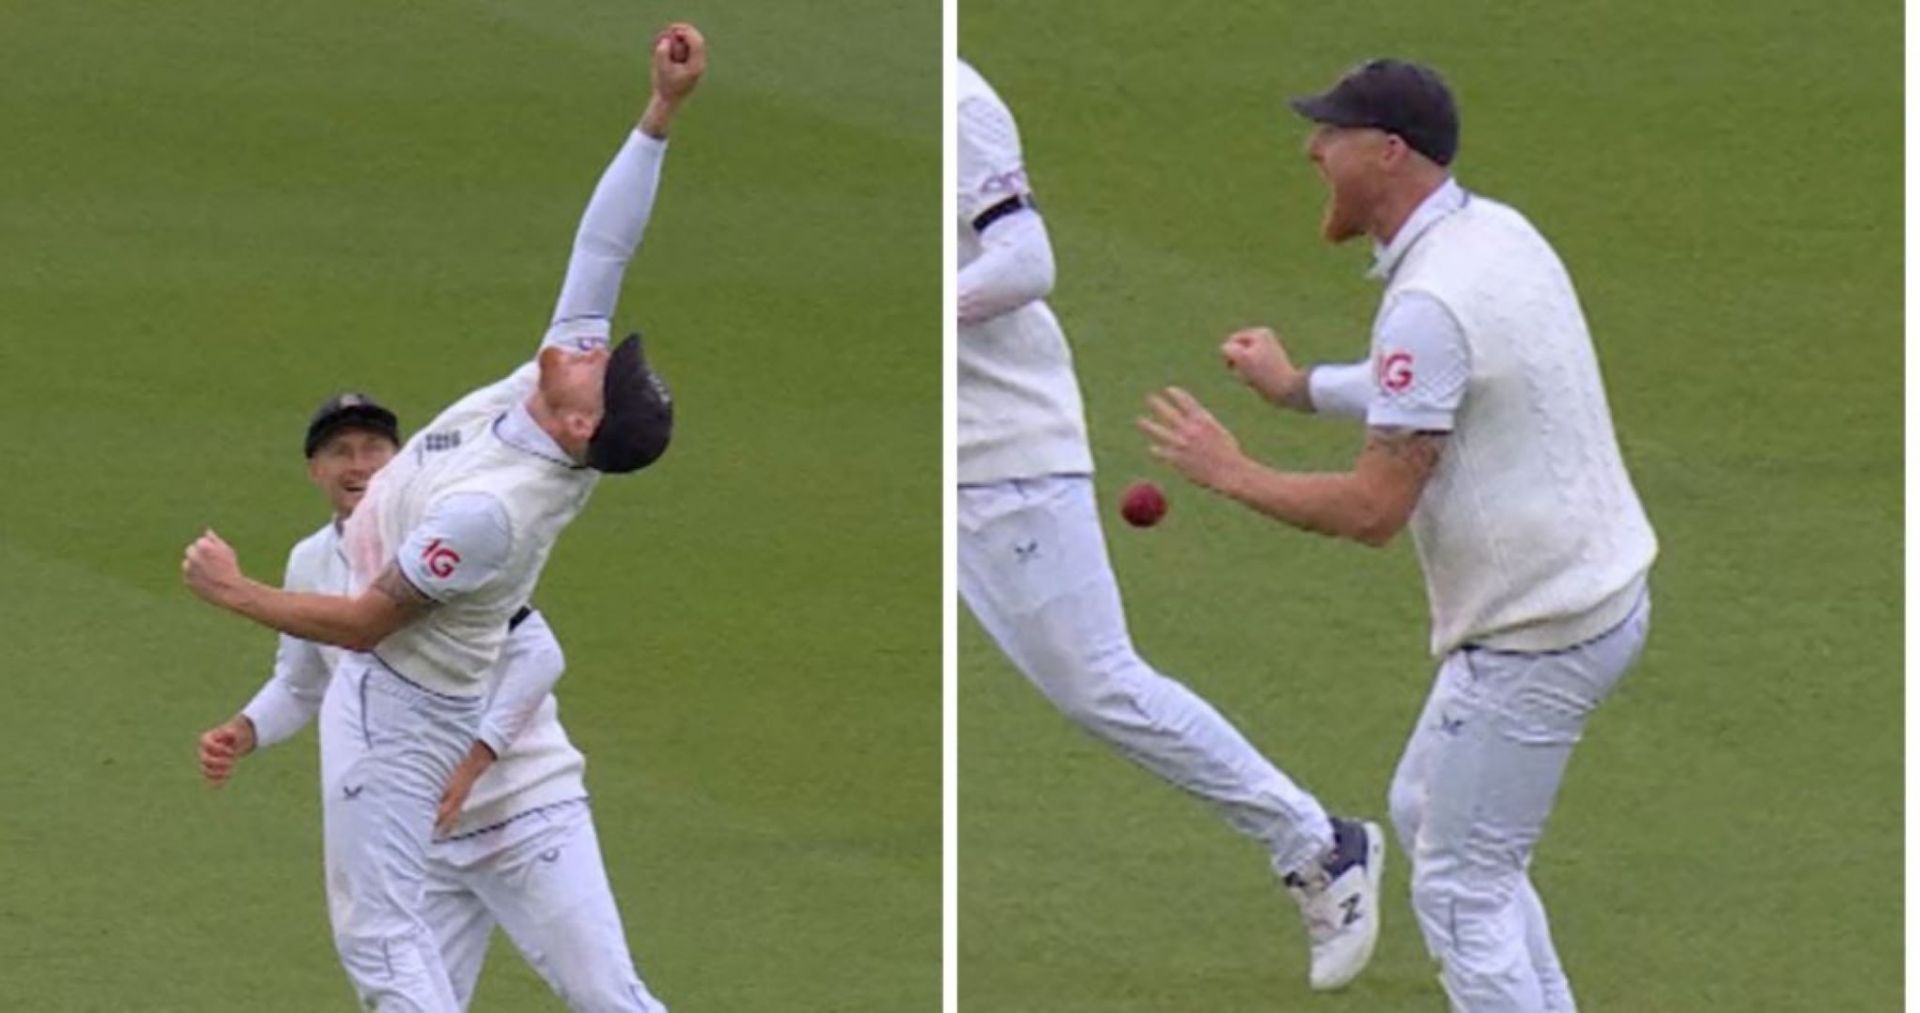 Ben Stokes took a brilliant one-handed catch but could not keep control of the ball